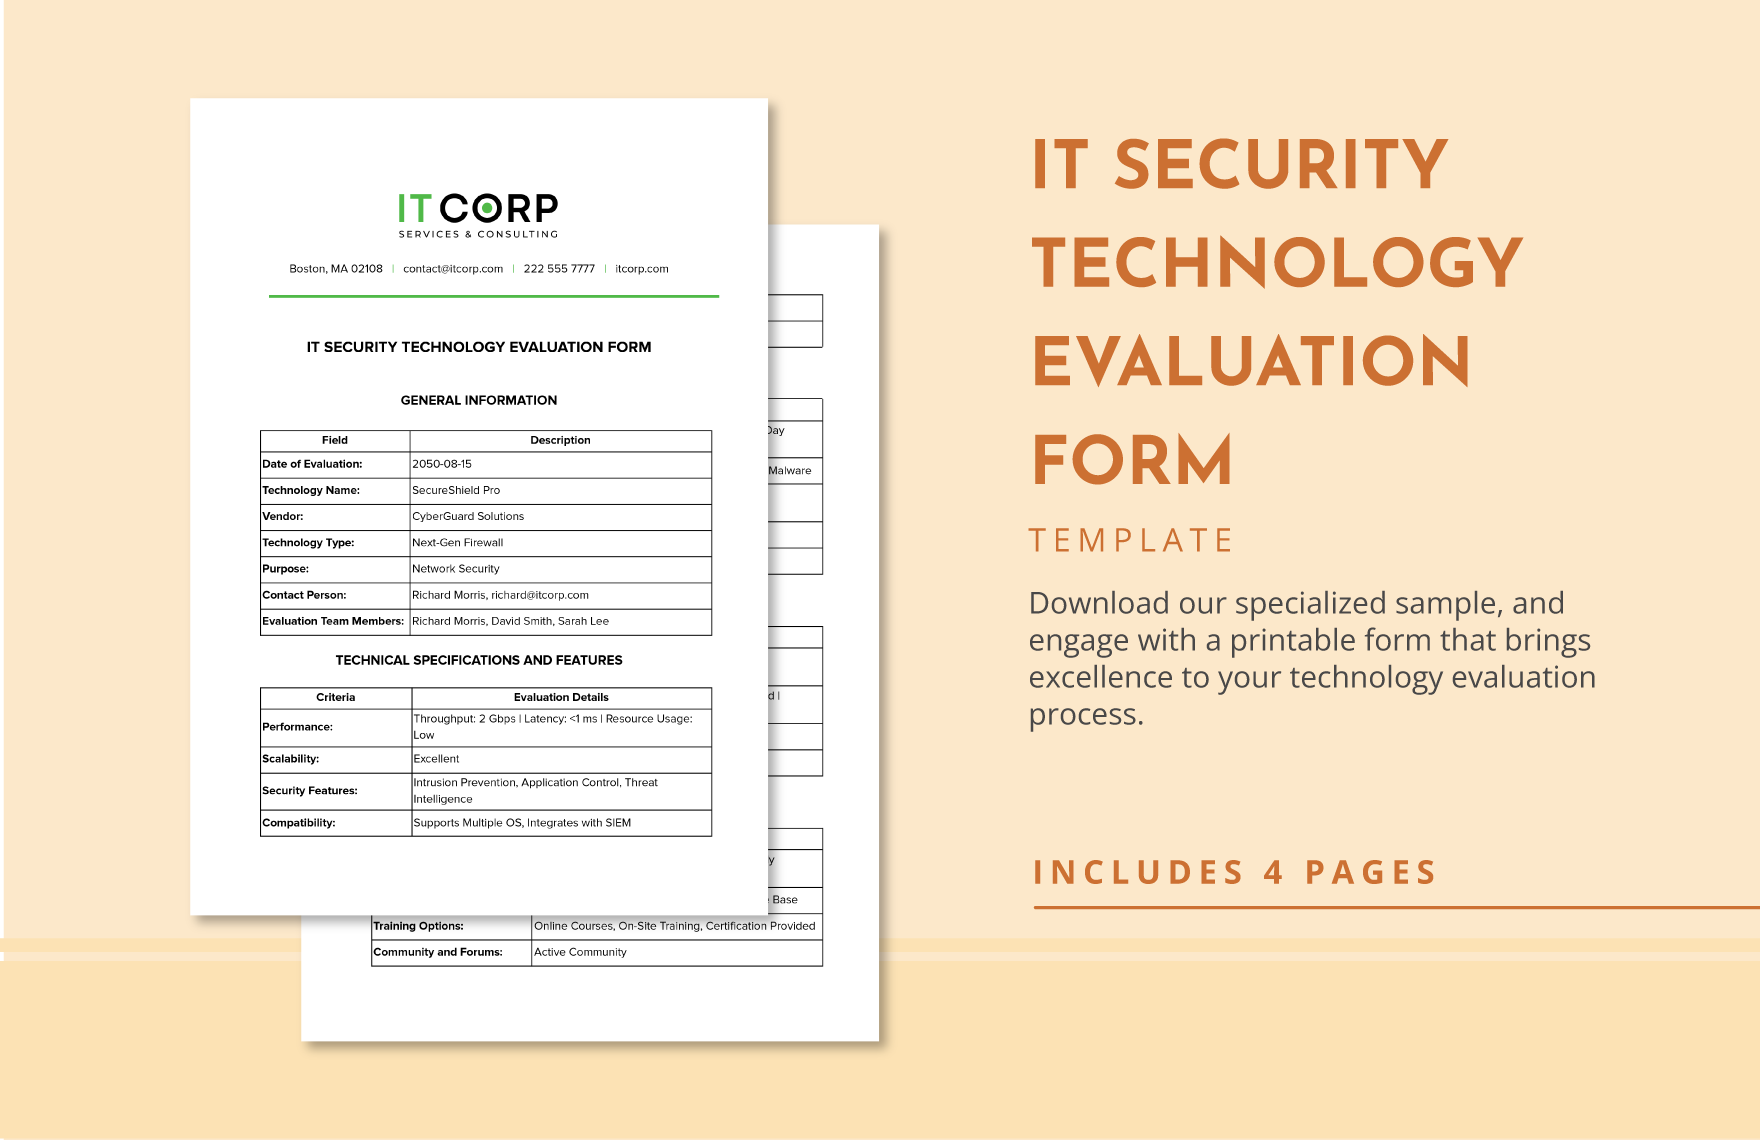 IT Security Technology Evaluation Form Template